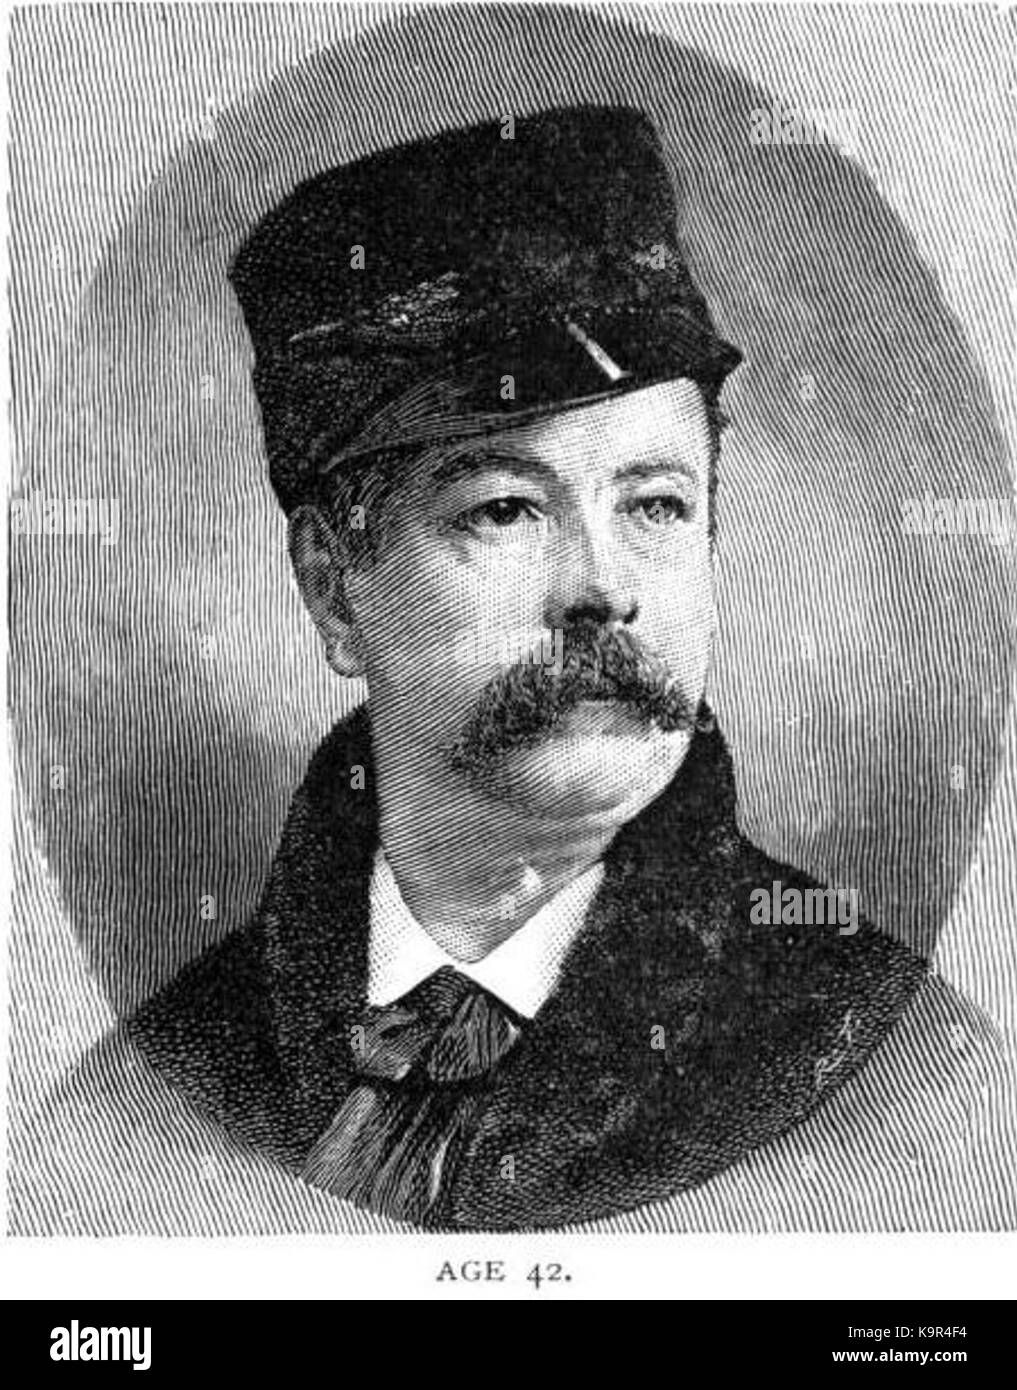 Portrait of Charles Frederick Worth aged 42 Stock Photo